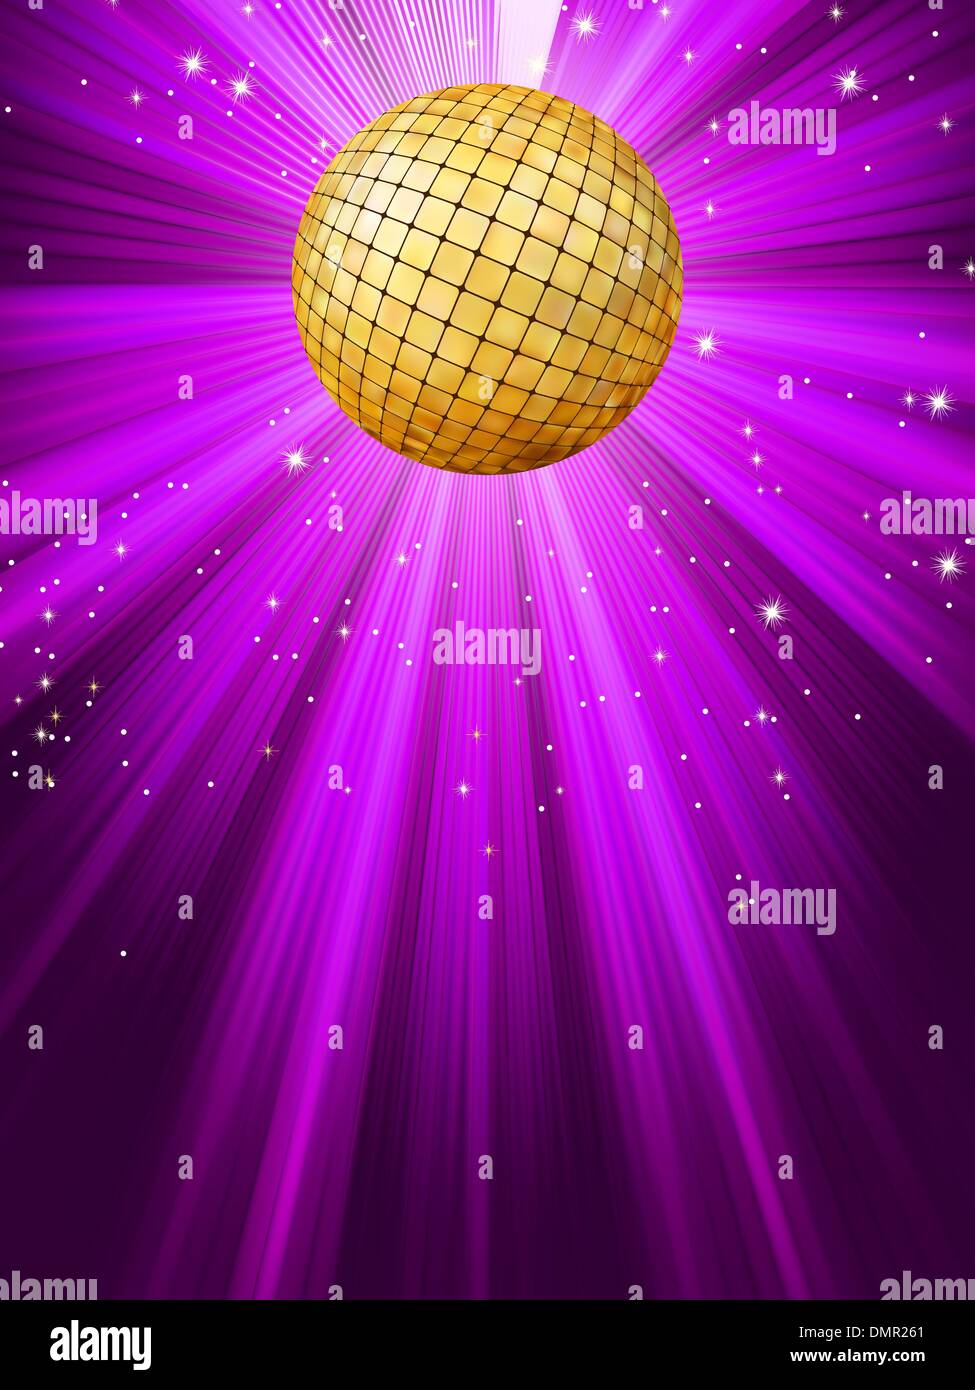 Party lights background. EPS 8 Stock Vector